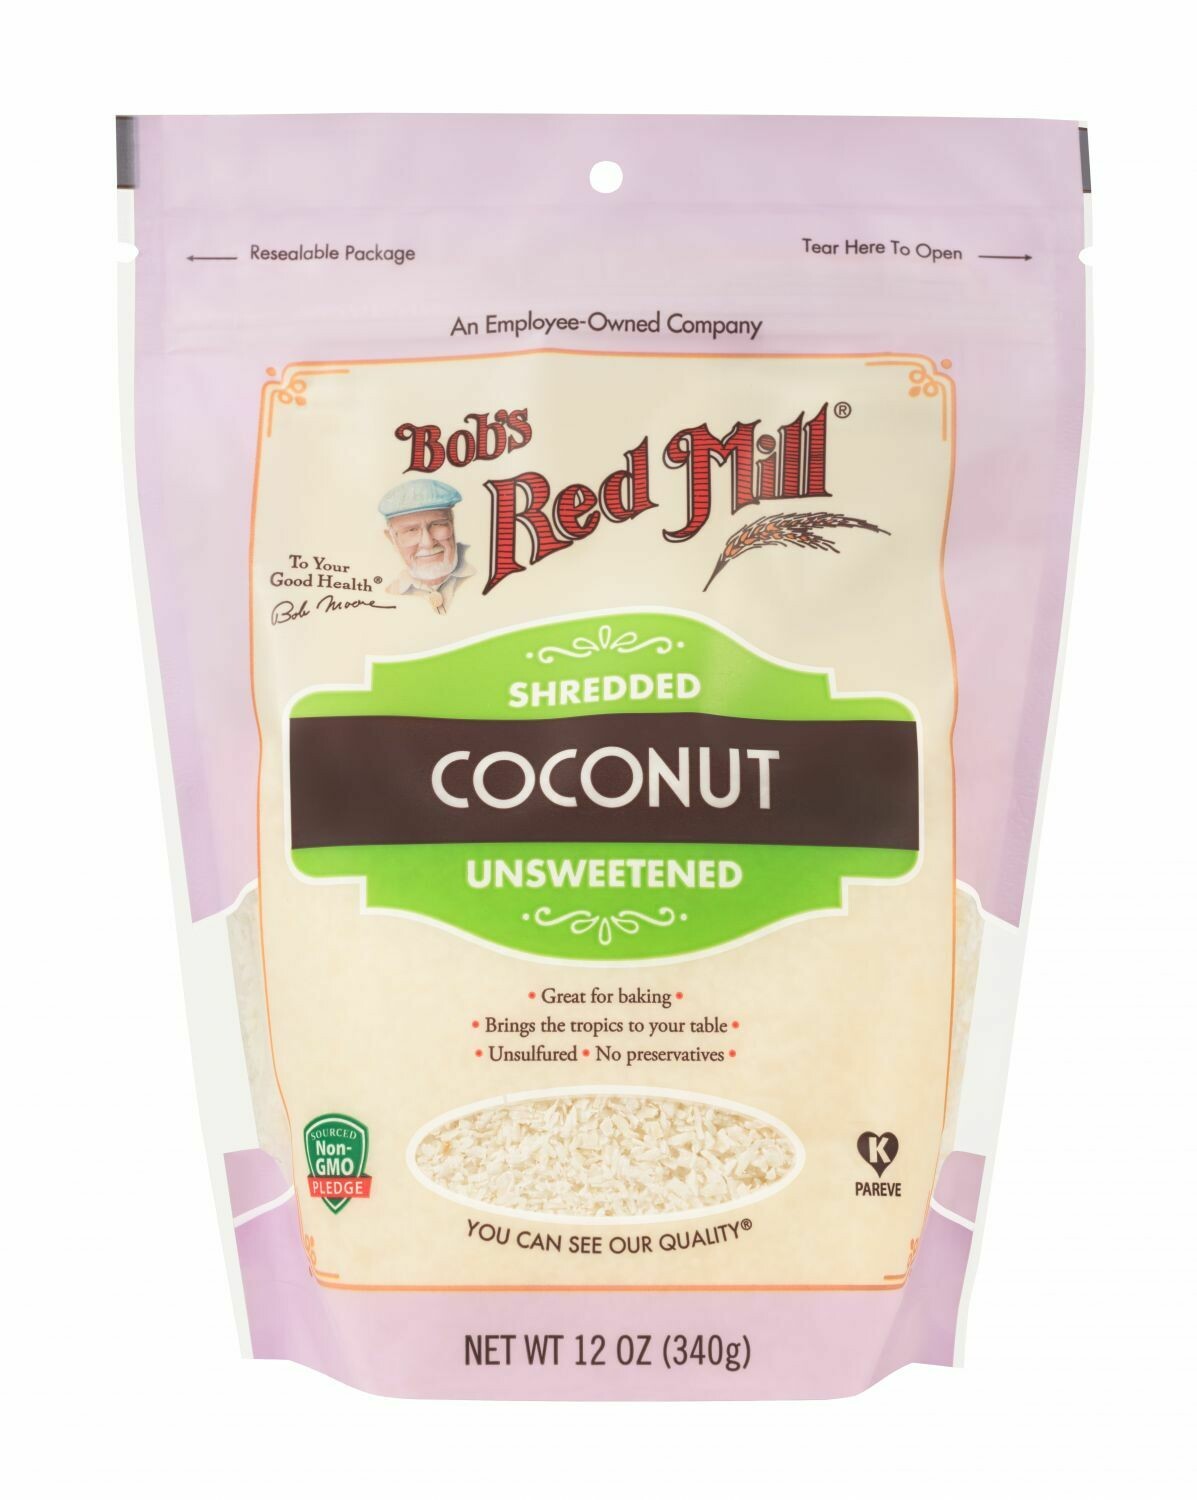 Bob's Red Mill Shredded Coconut Unsweetened